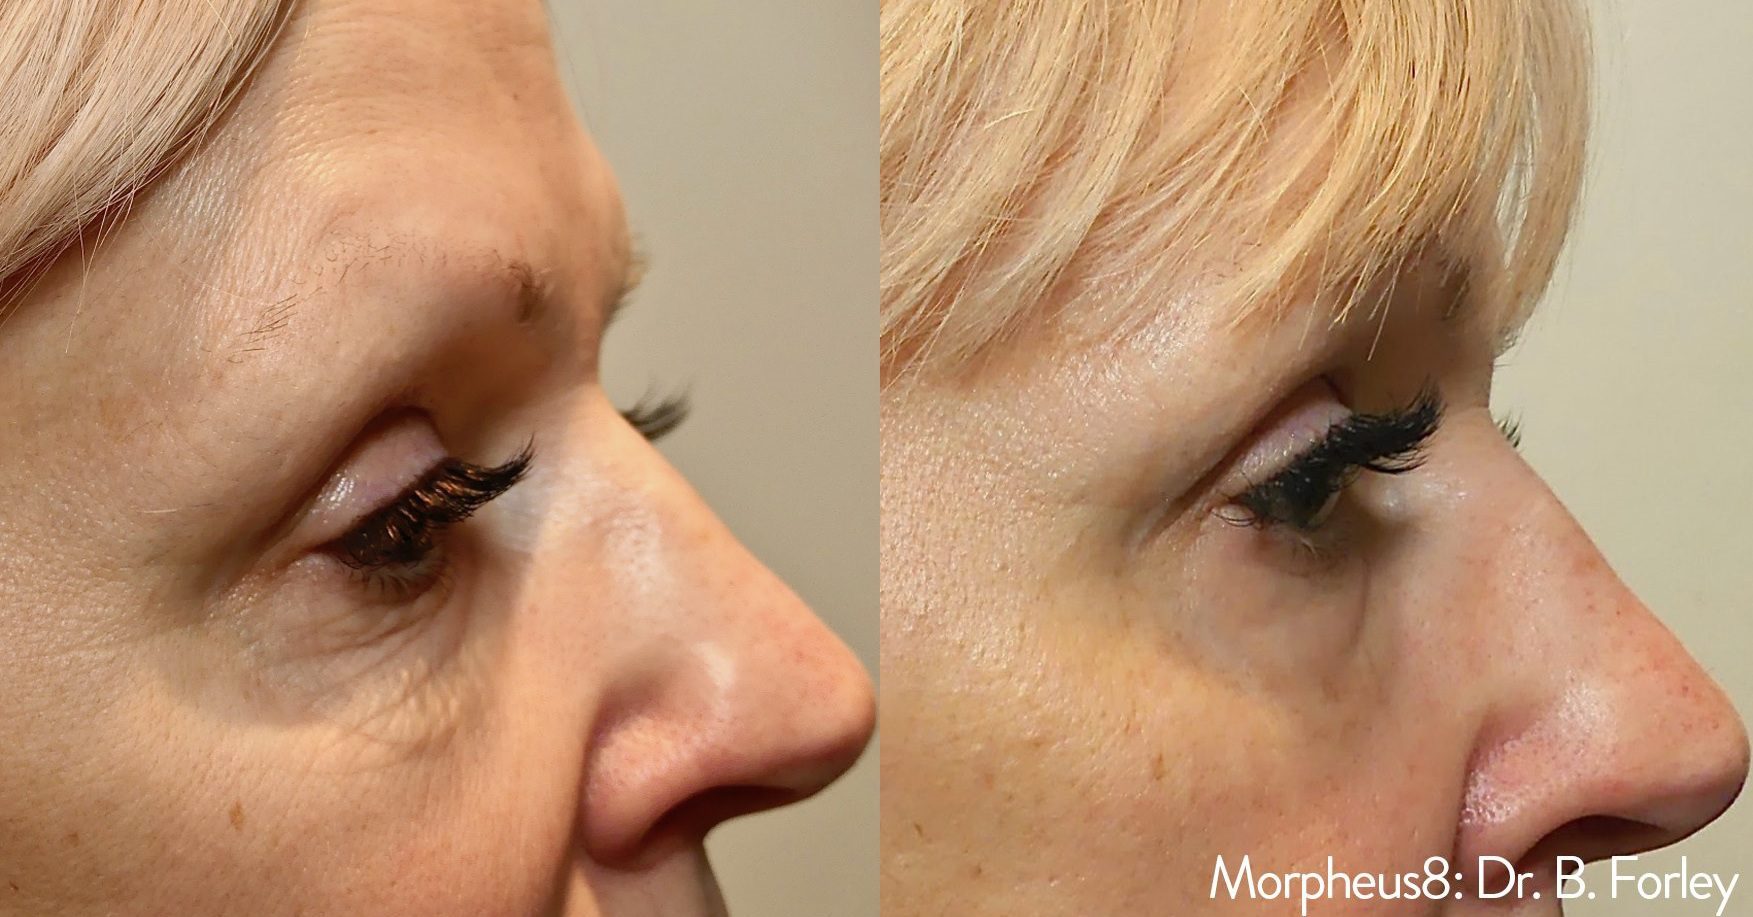 Morpheus8 eye wrinkles before and after